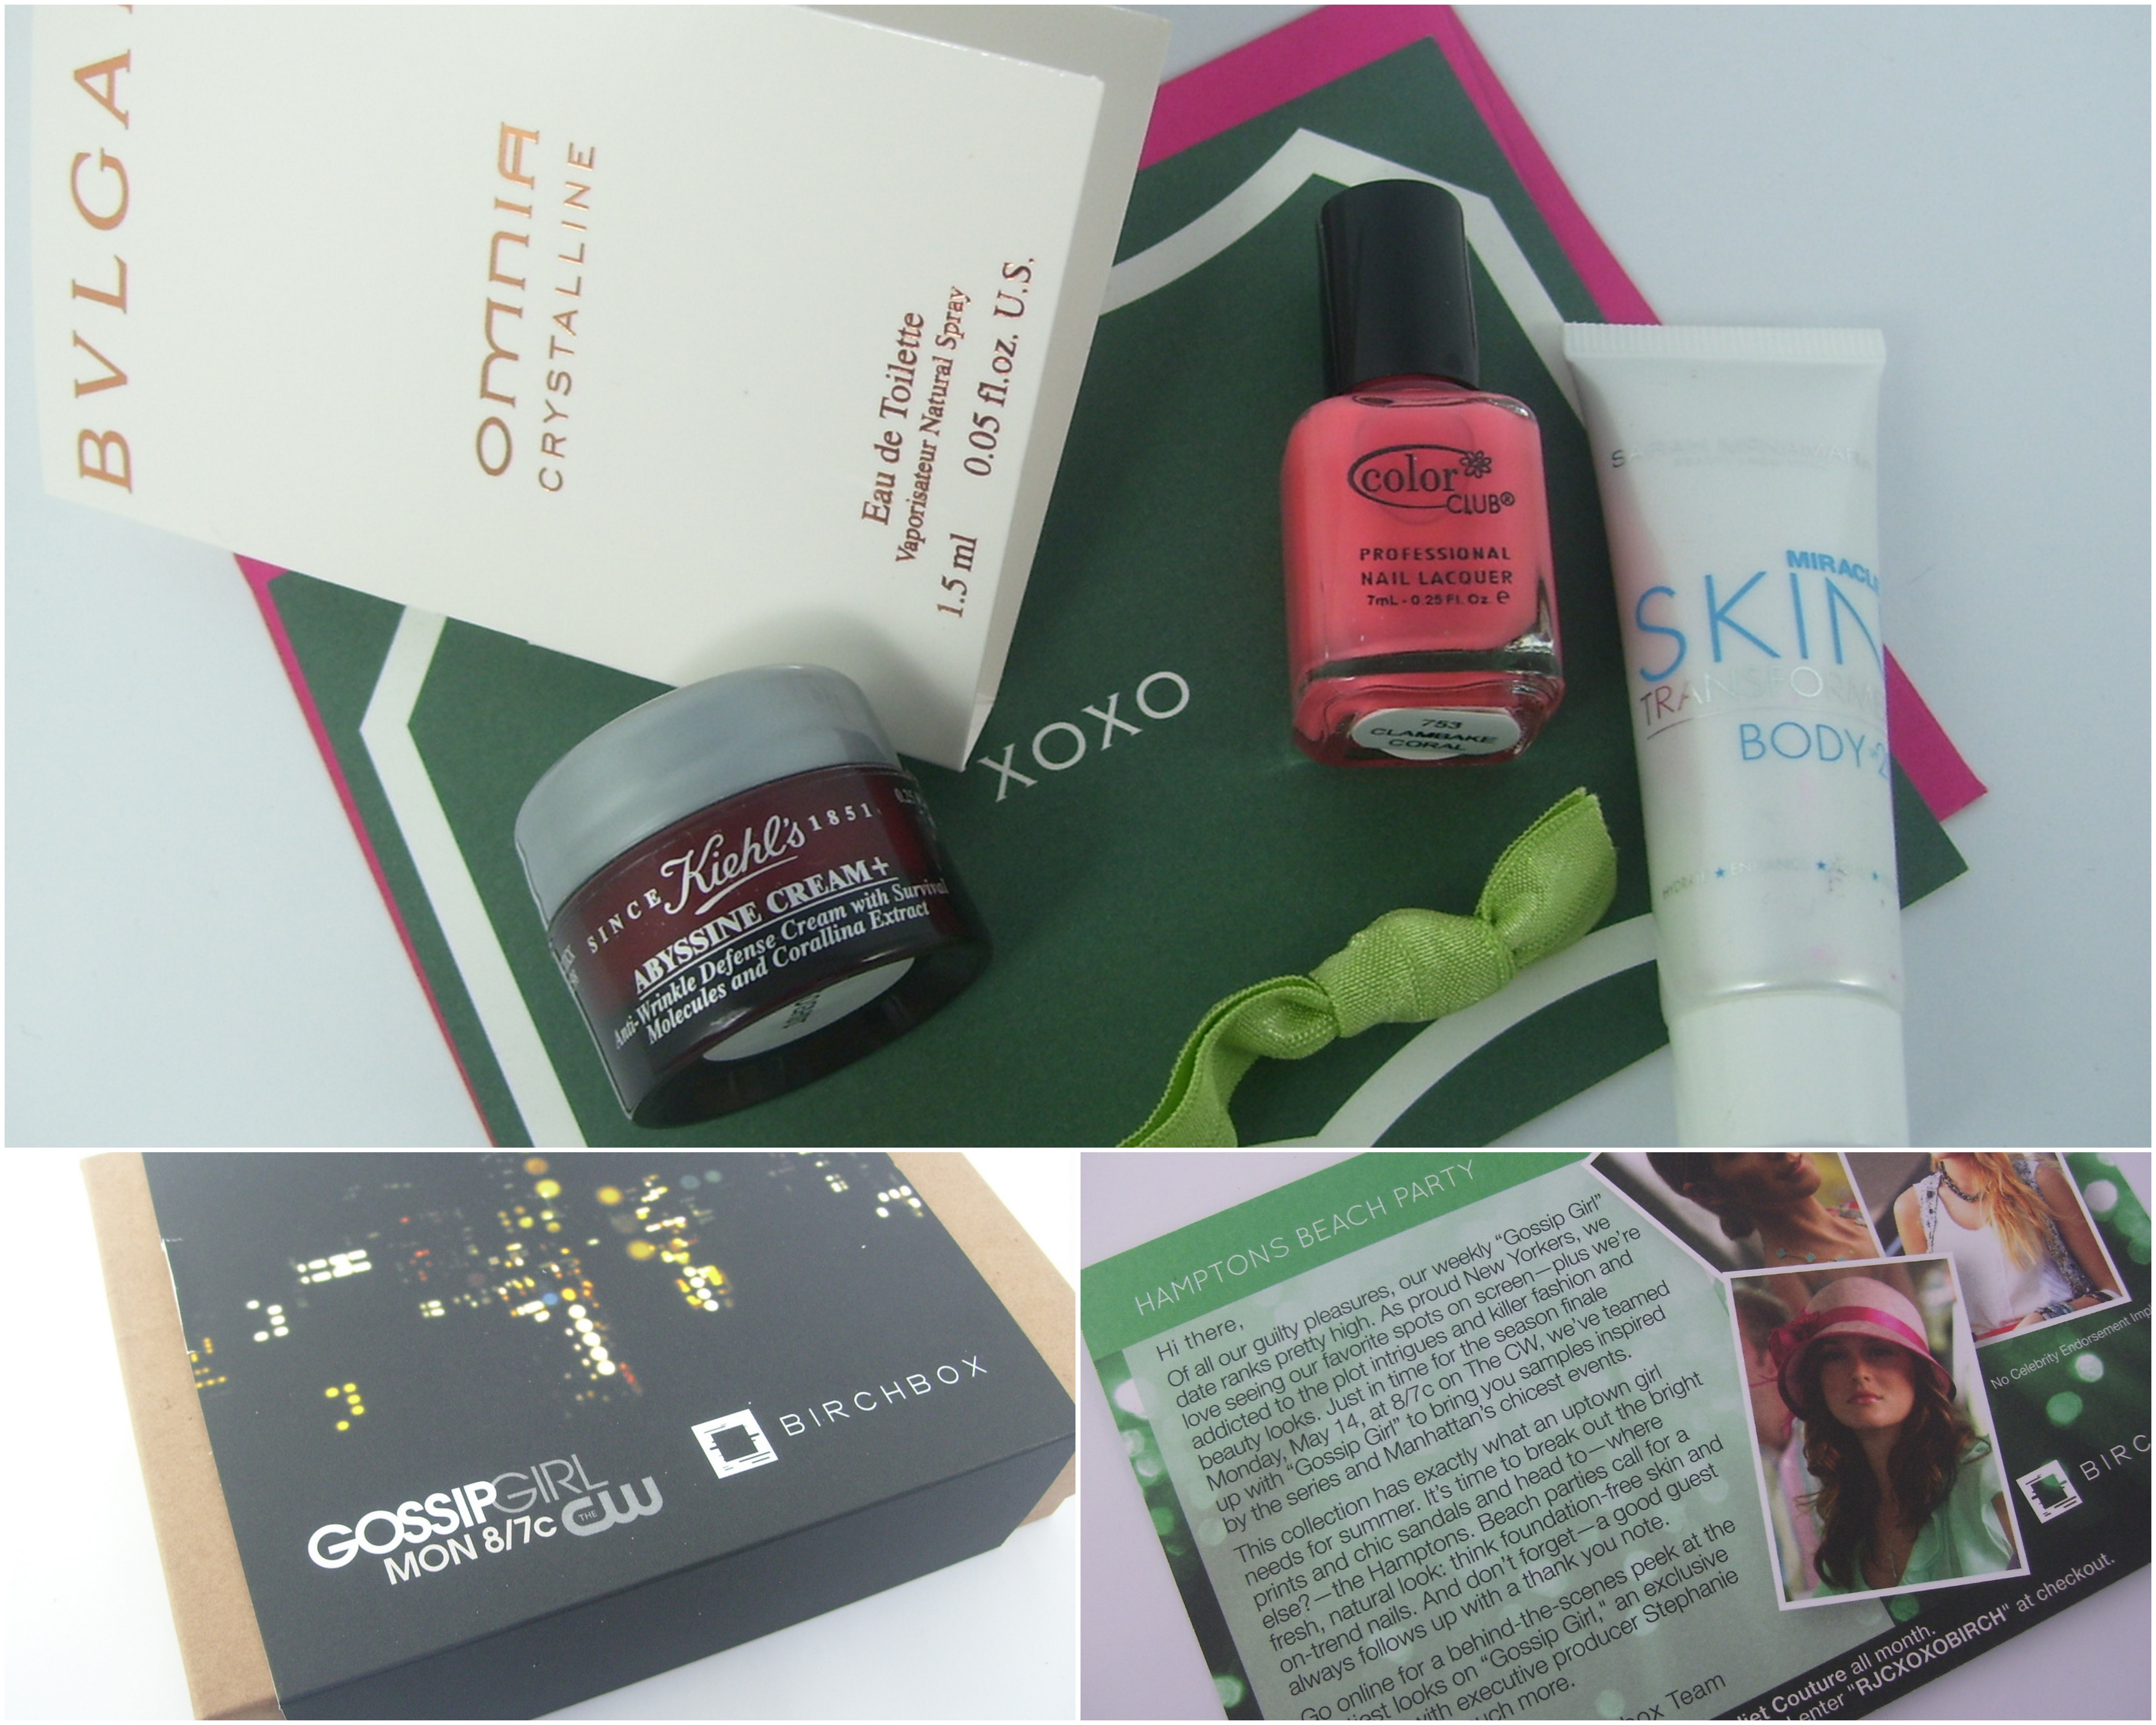 See What’s in My Gossip Girl Birchbox for May 2012